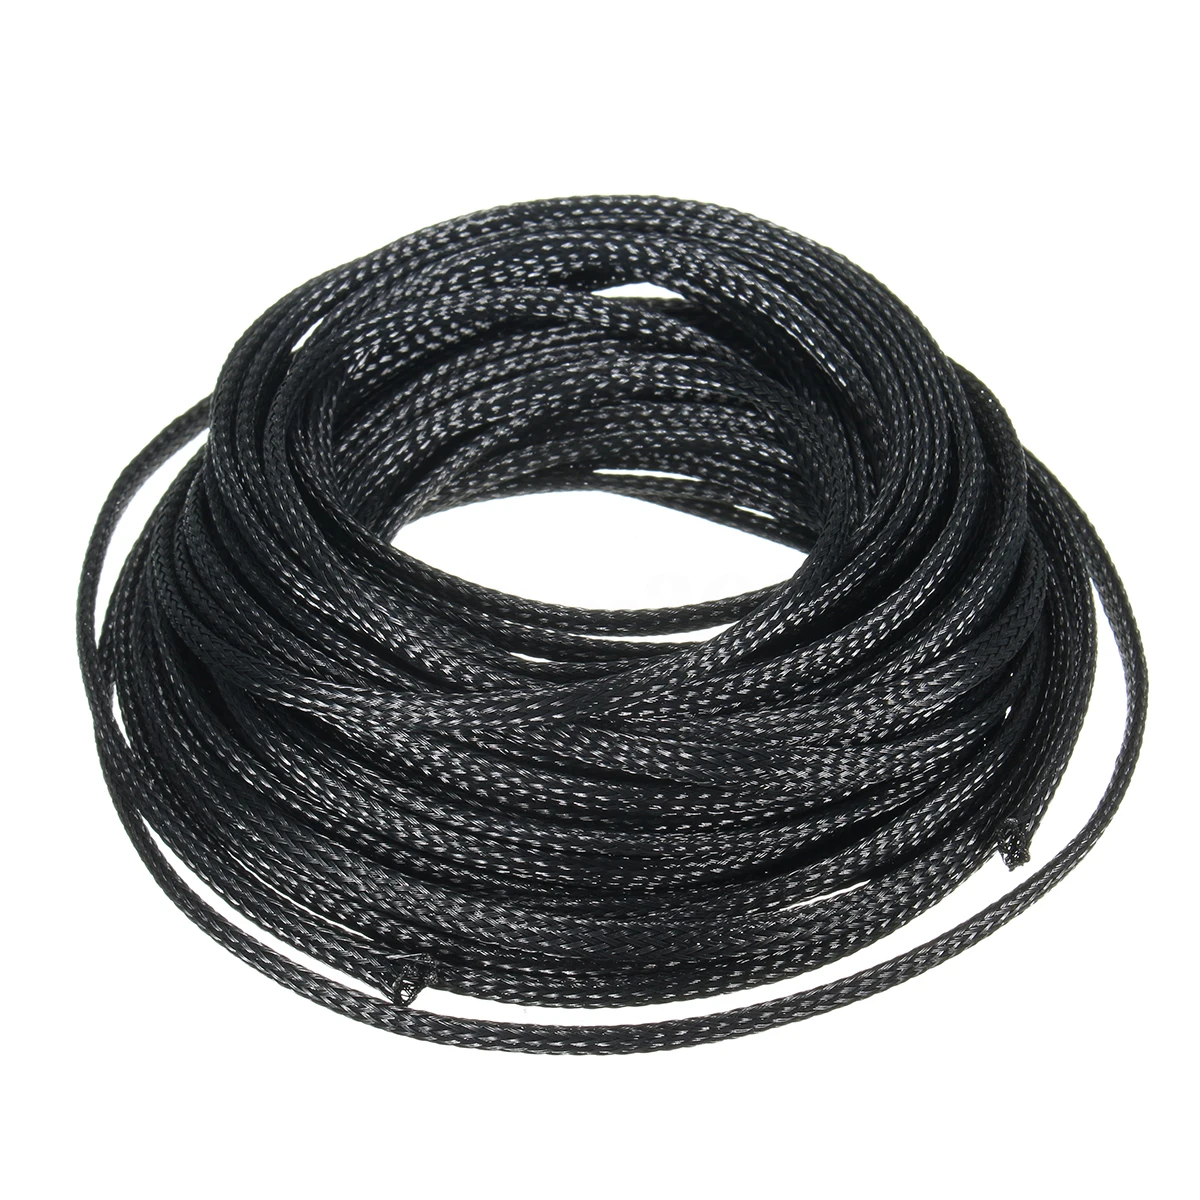 qty 5 ft 2mm round PET sleeving black for computer or audio cables 